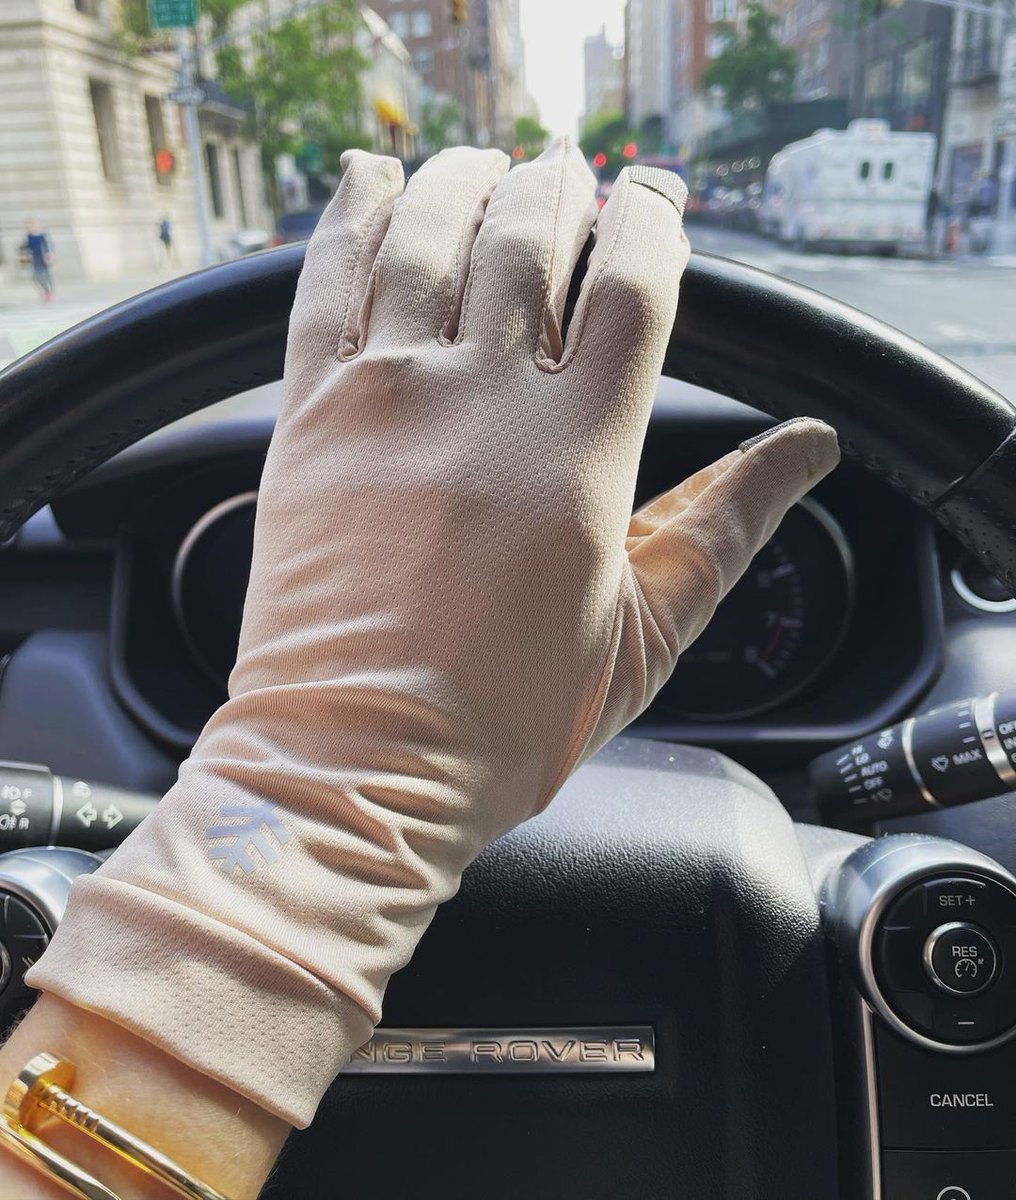 coolibar on X: Our UPF 50+ Sun Gloves go the extra mile. With touchscreen  compatibilities and silicone print grippers, our Gannett UV Gloves  represent everything sun smart.  / X